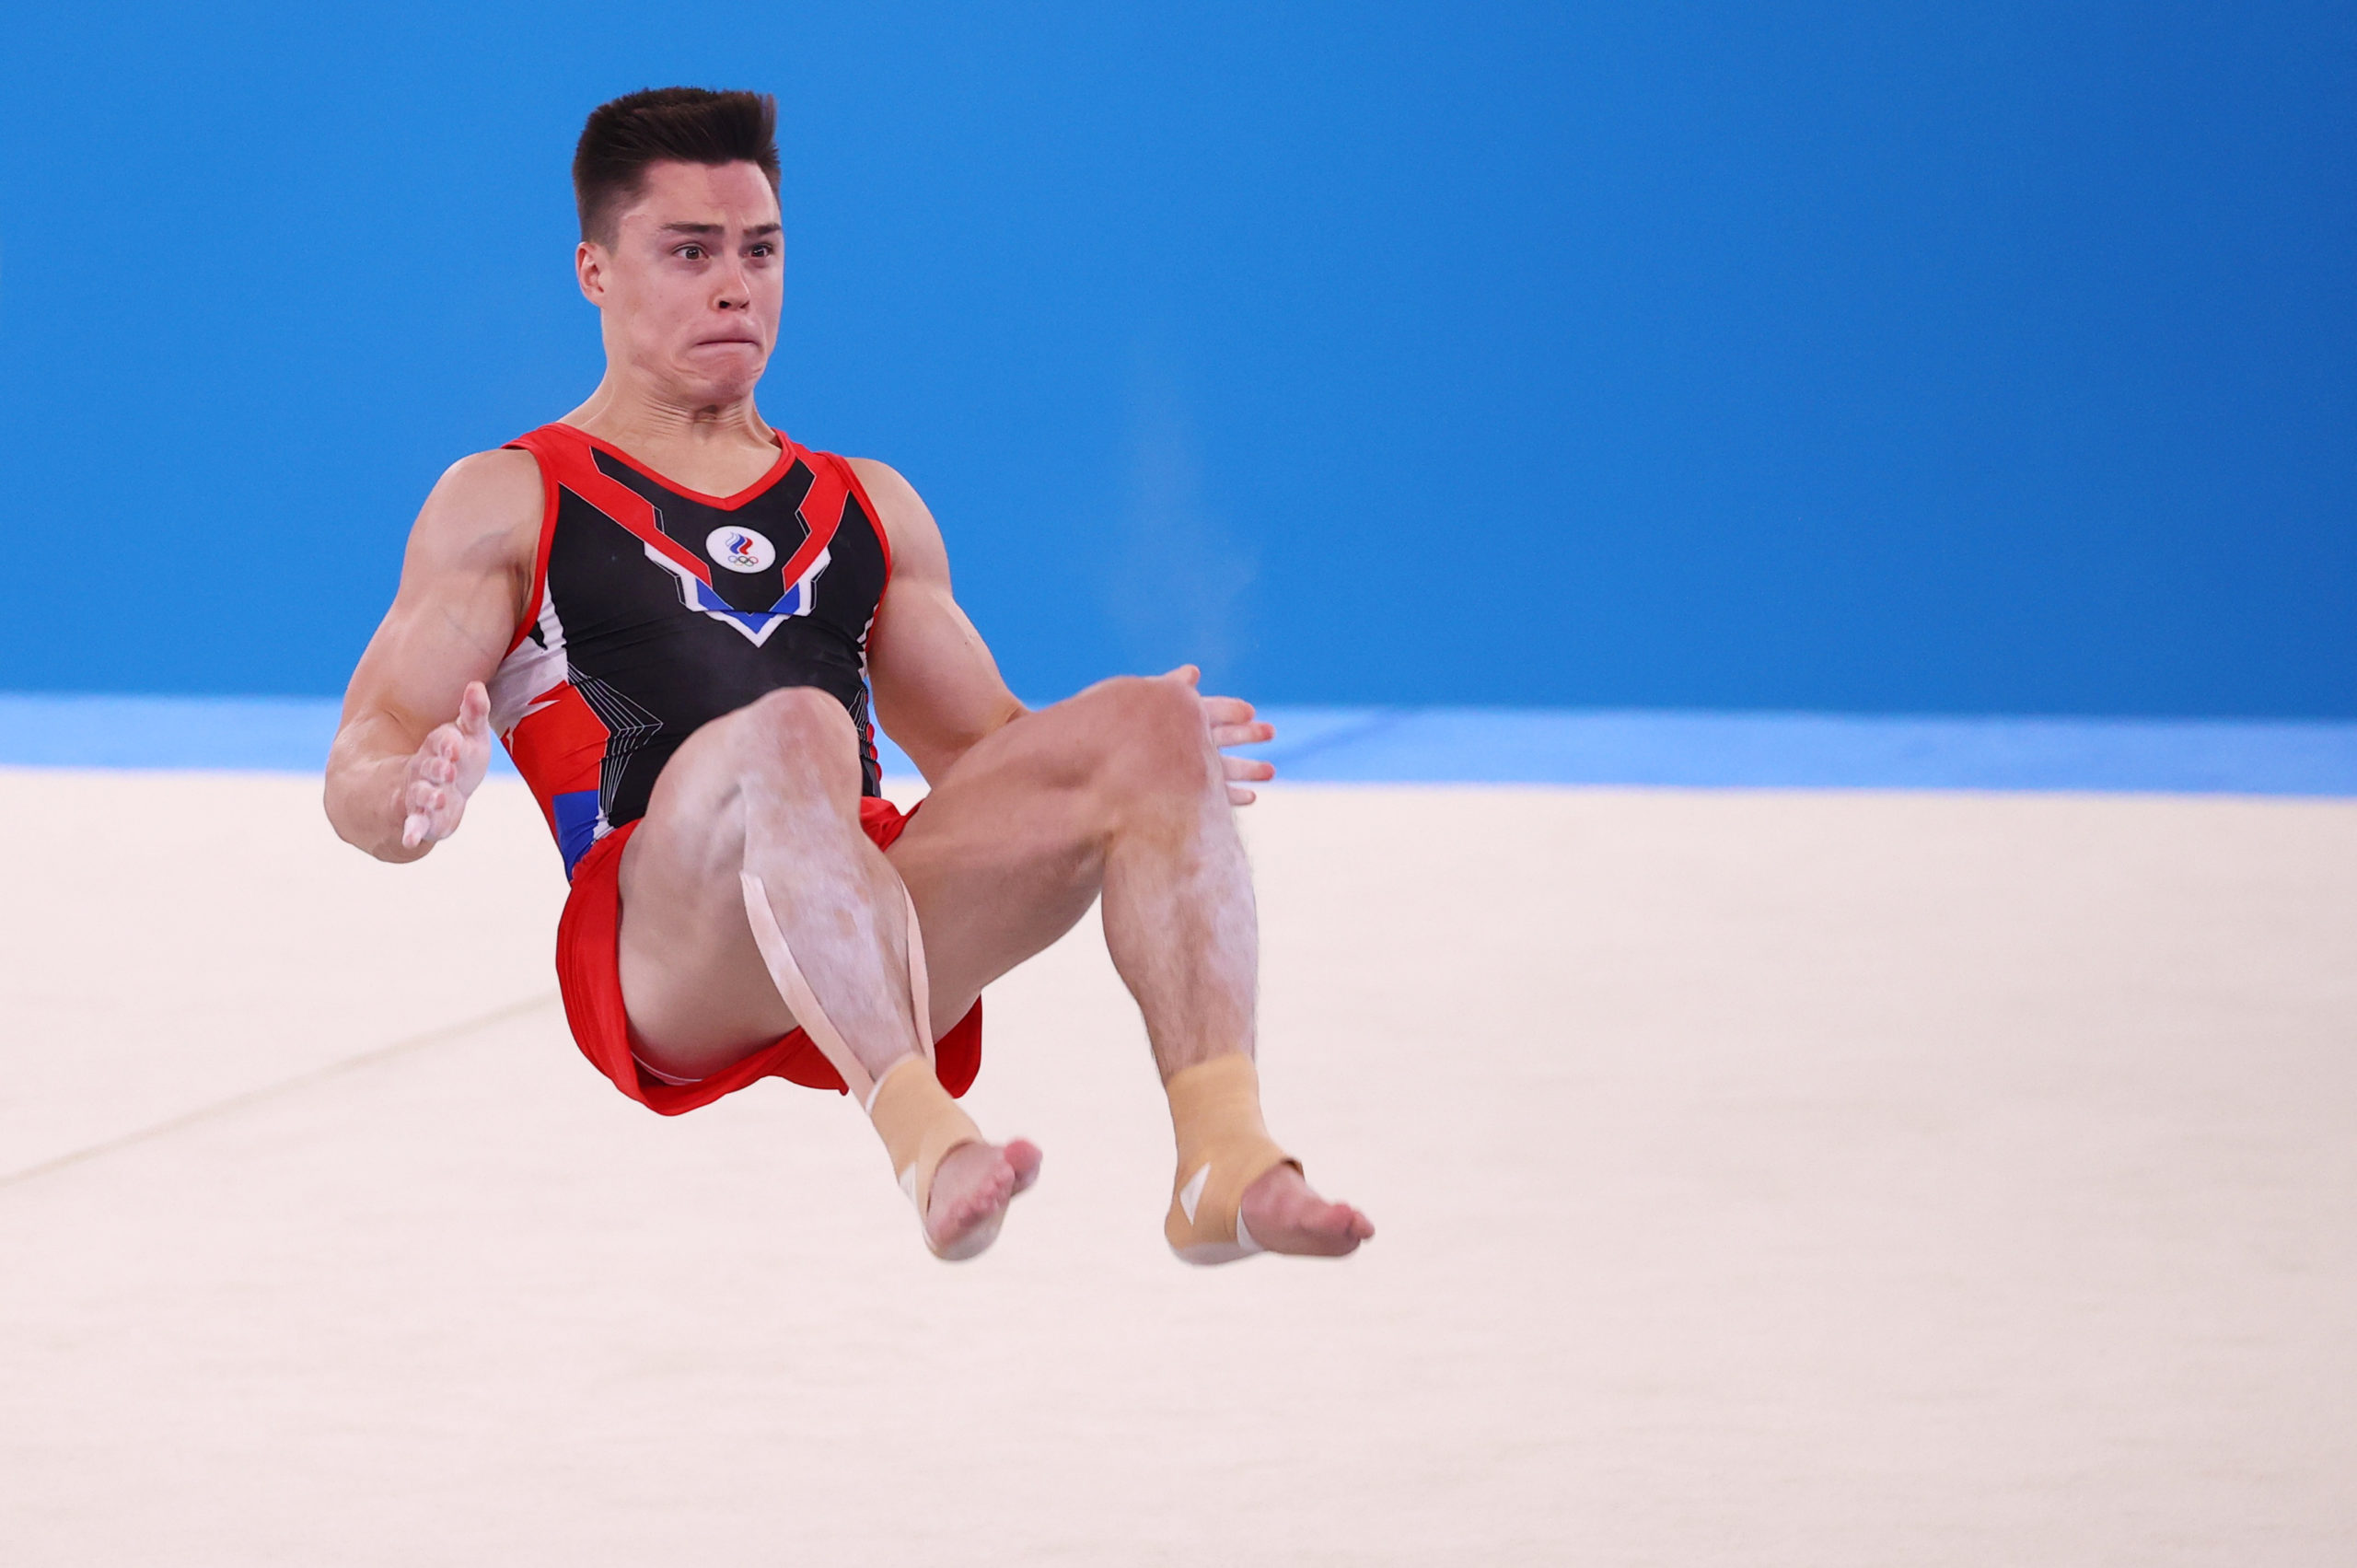 Qualification - Ariake Gymnastics Centre, Tokyo, Japan - July 24, 2021. Nikita Nagornyy of the Russian Olympic Committee in action on the floor. 